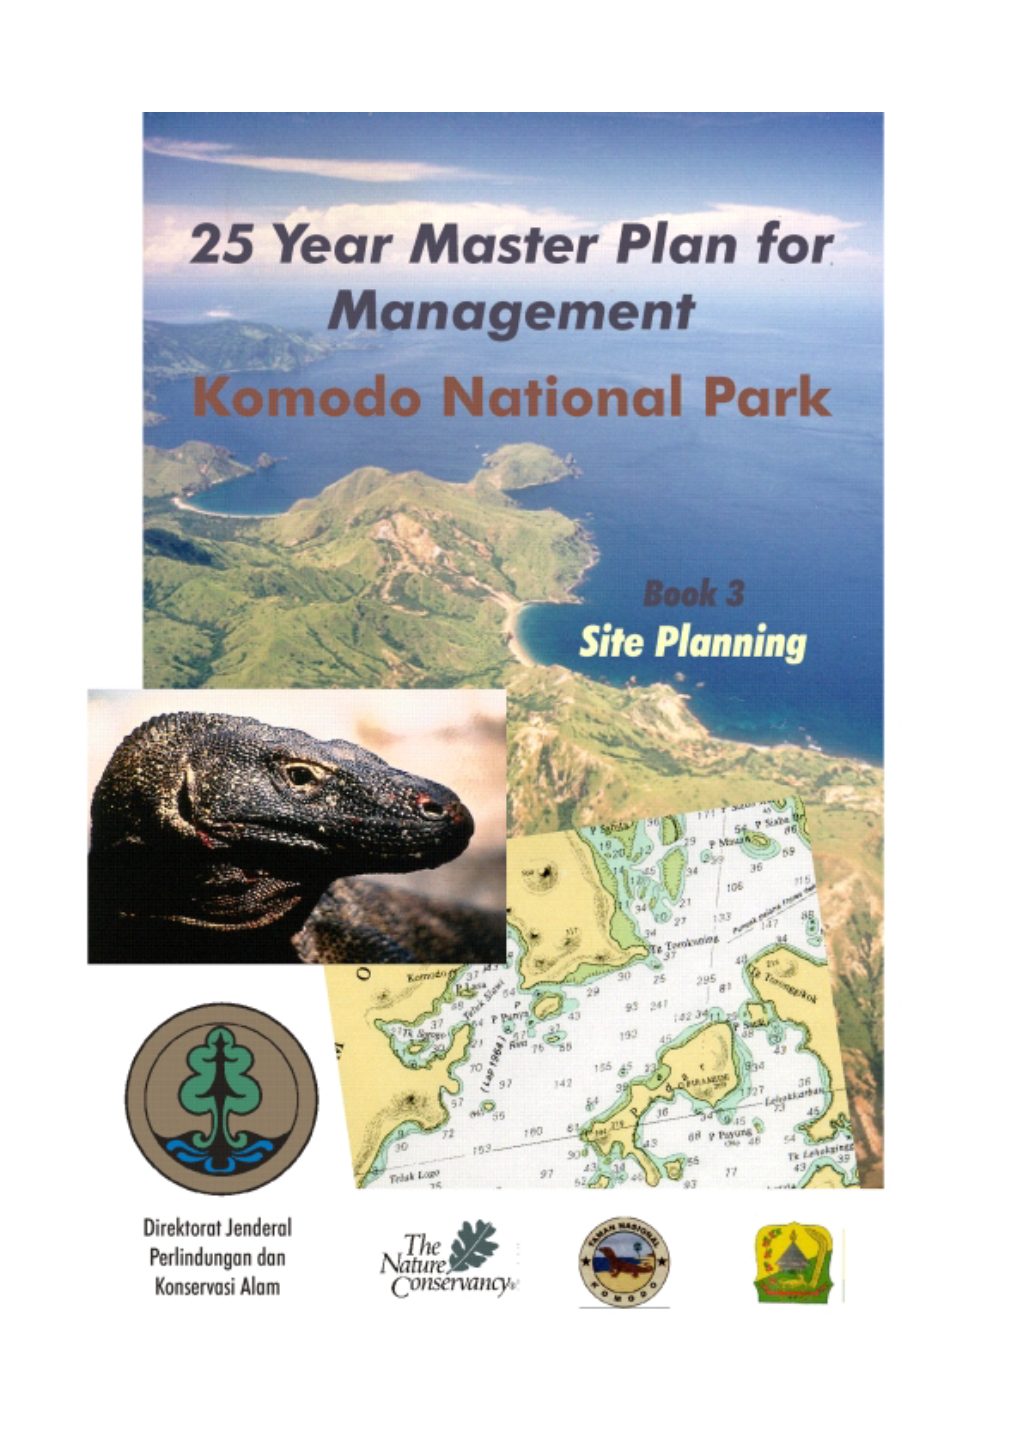 25 Year Master Plan for Management Komodo National Park Book 3 Site